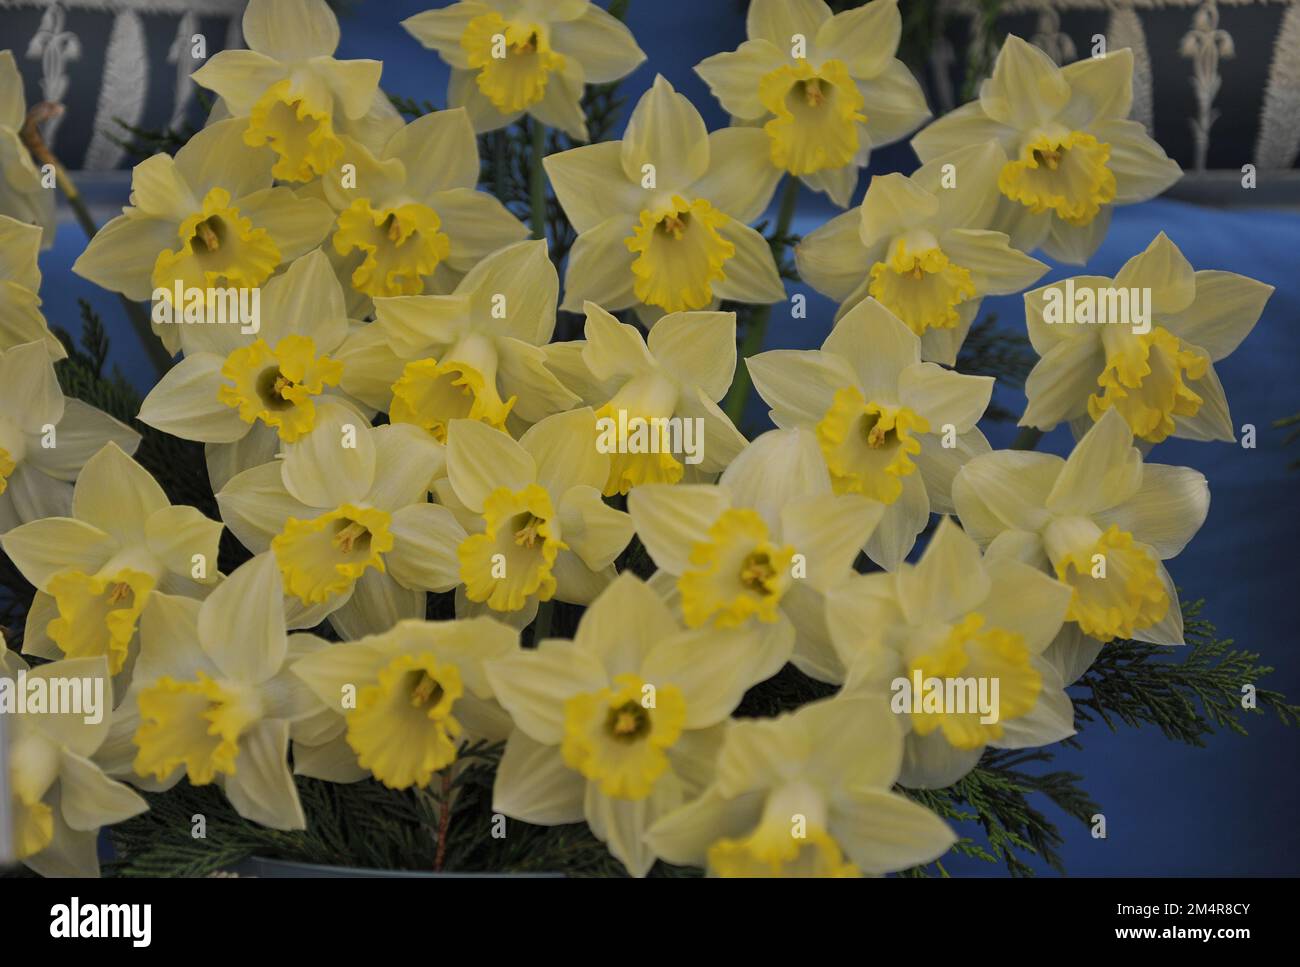 A bouquet of yellow Trumpet daffodils (Narcissus) Pistachio on an exhibition in May Stock Photo